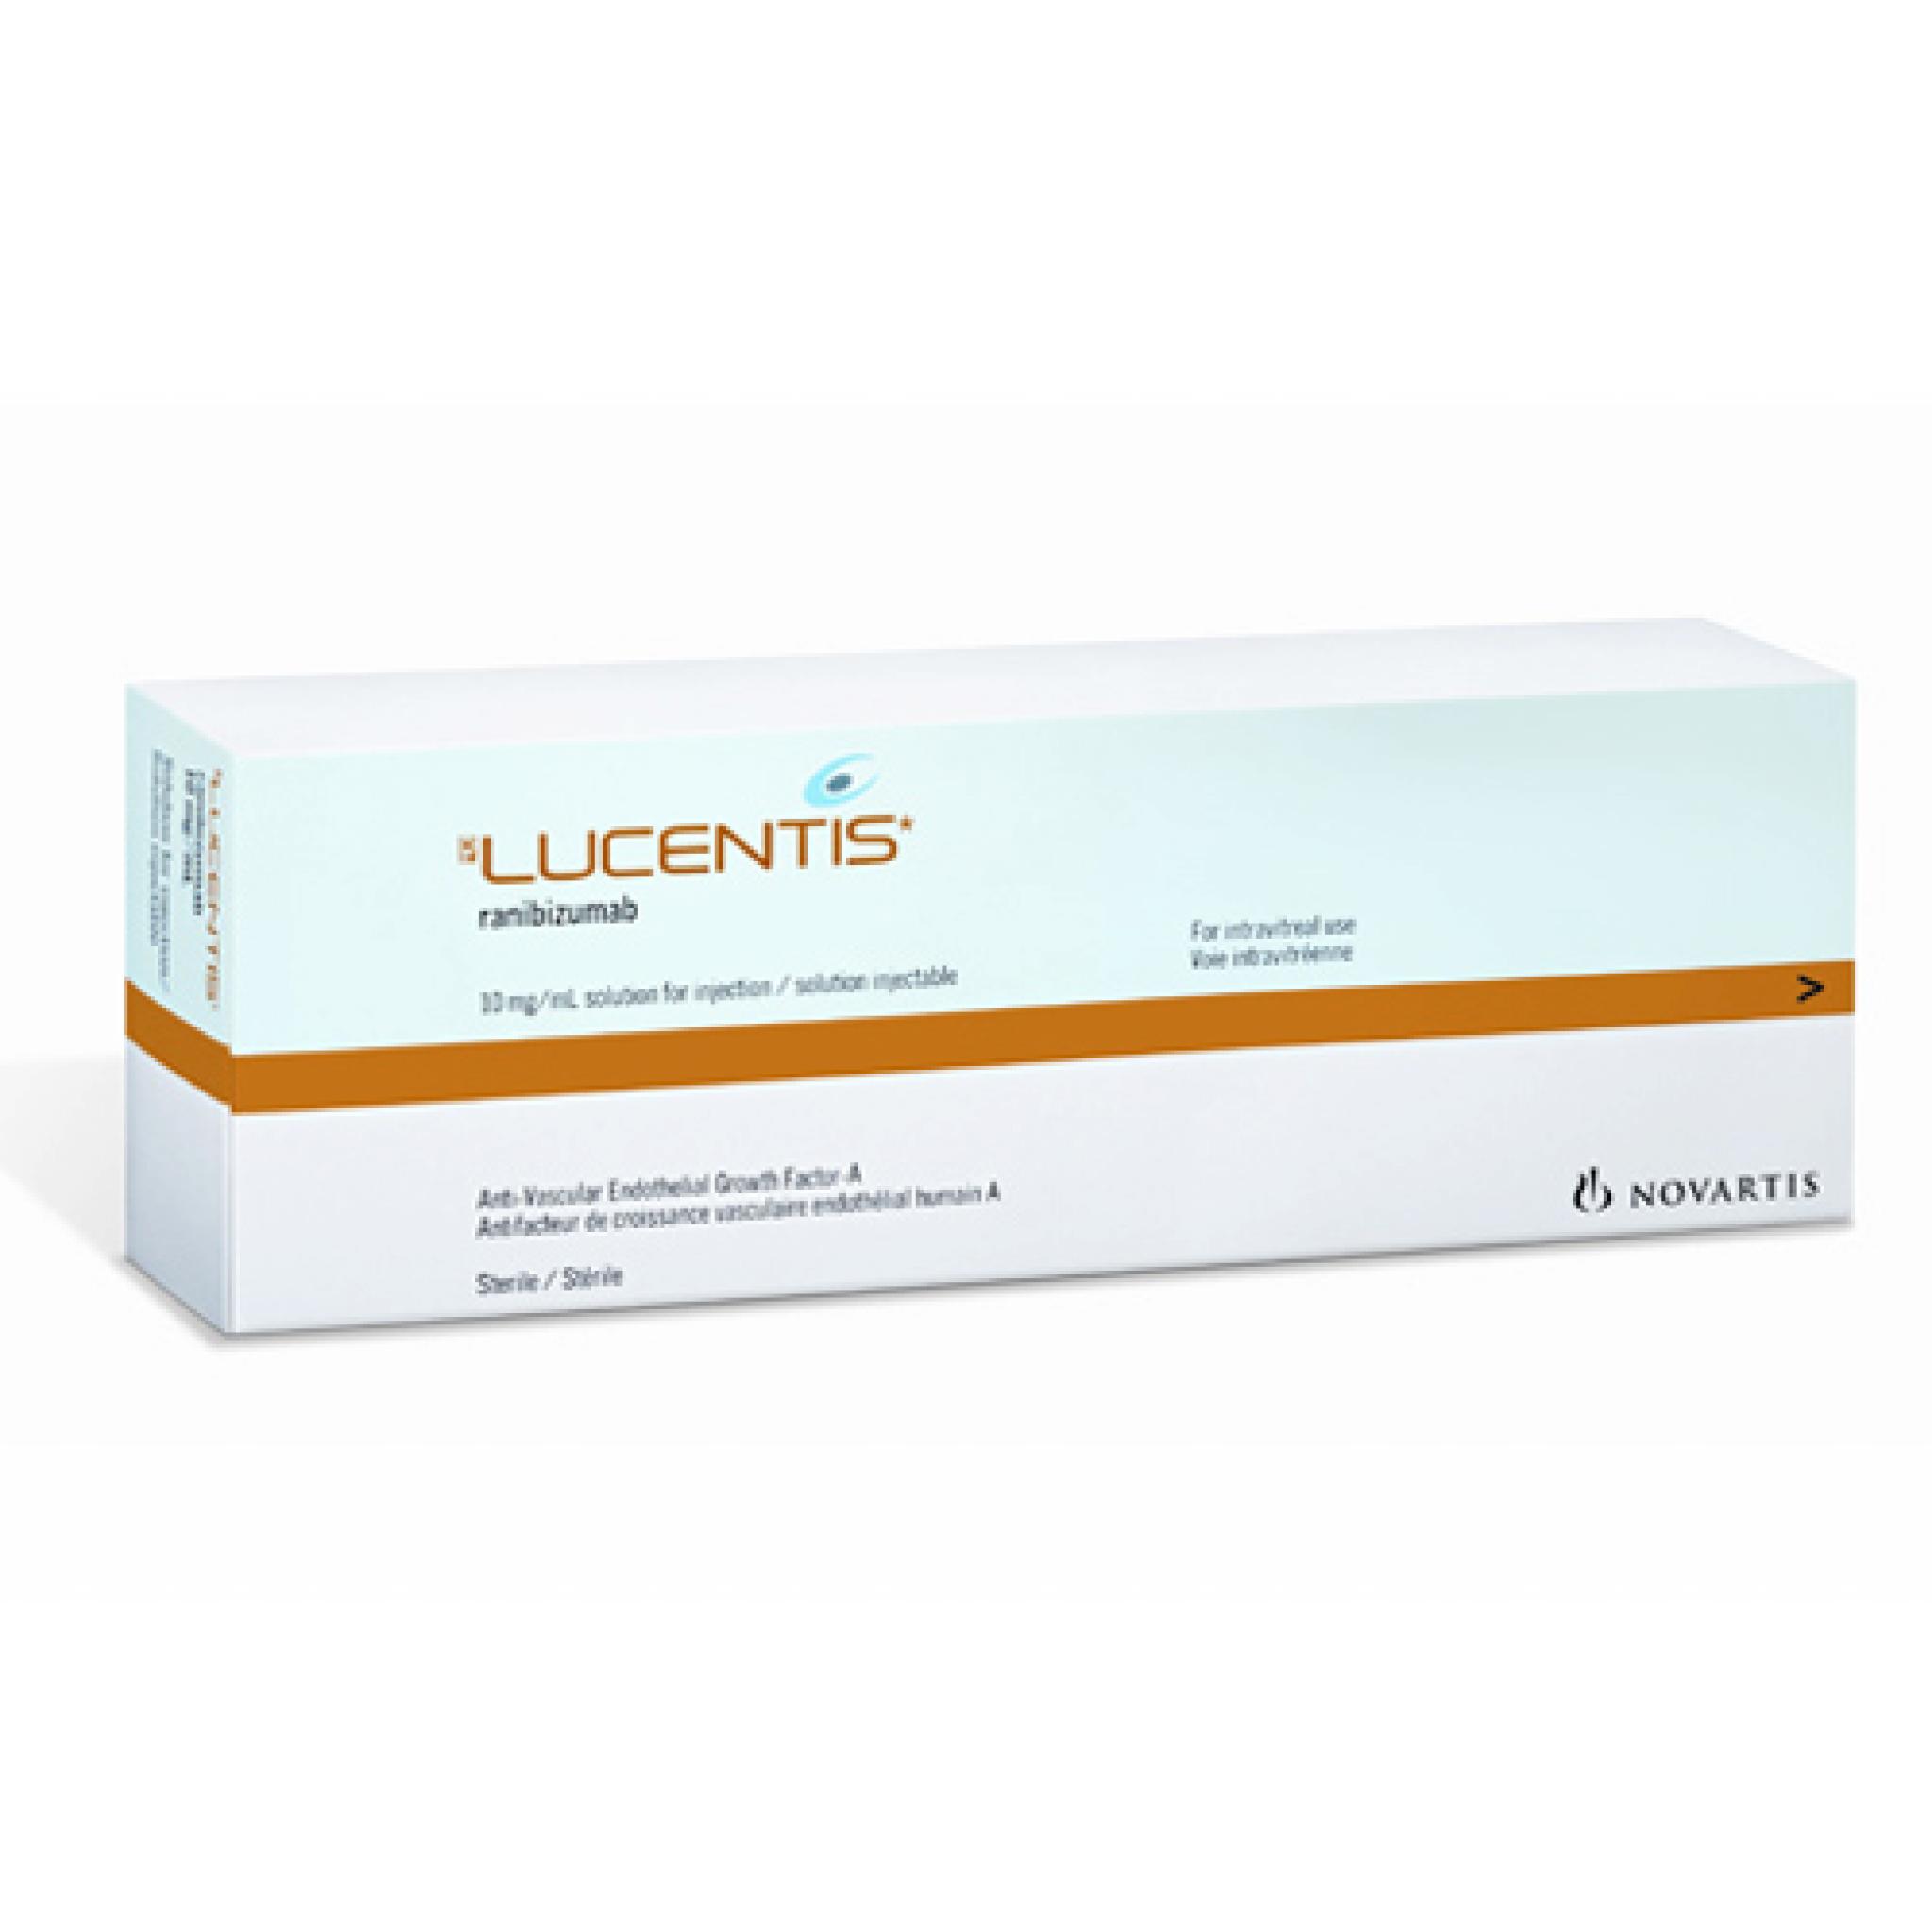 lucentis-injection-3-mg-0-3-ml-1-vial-price-in-pakistan-medicalstore